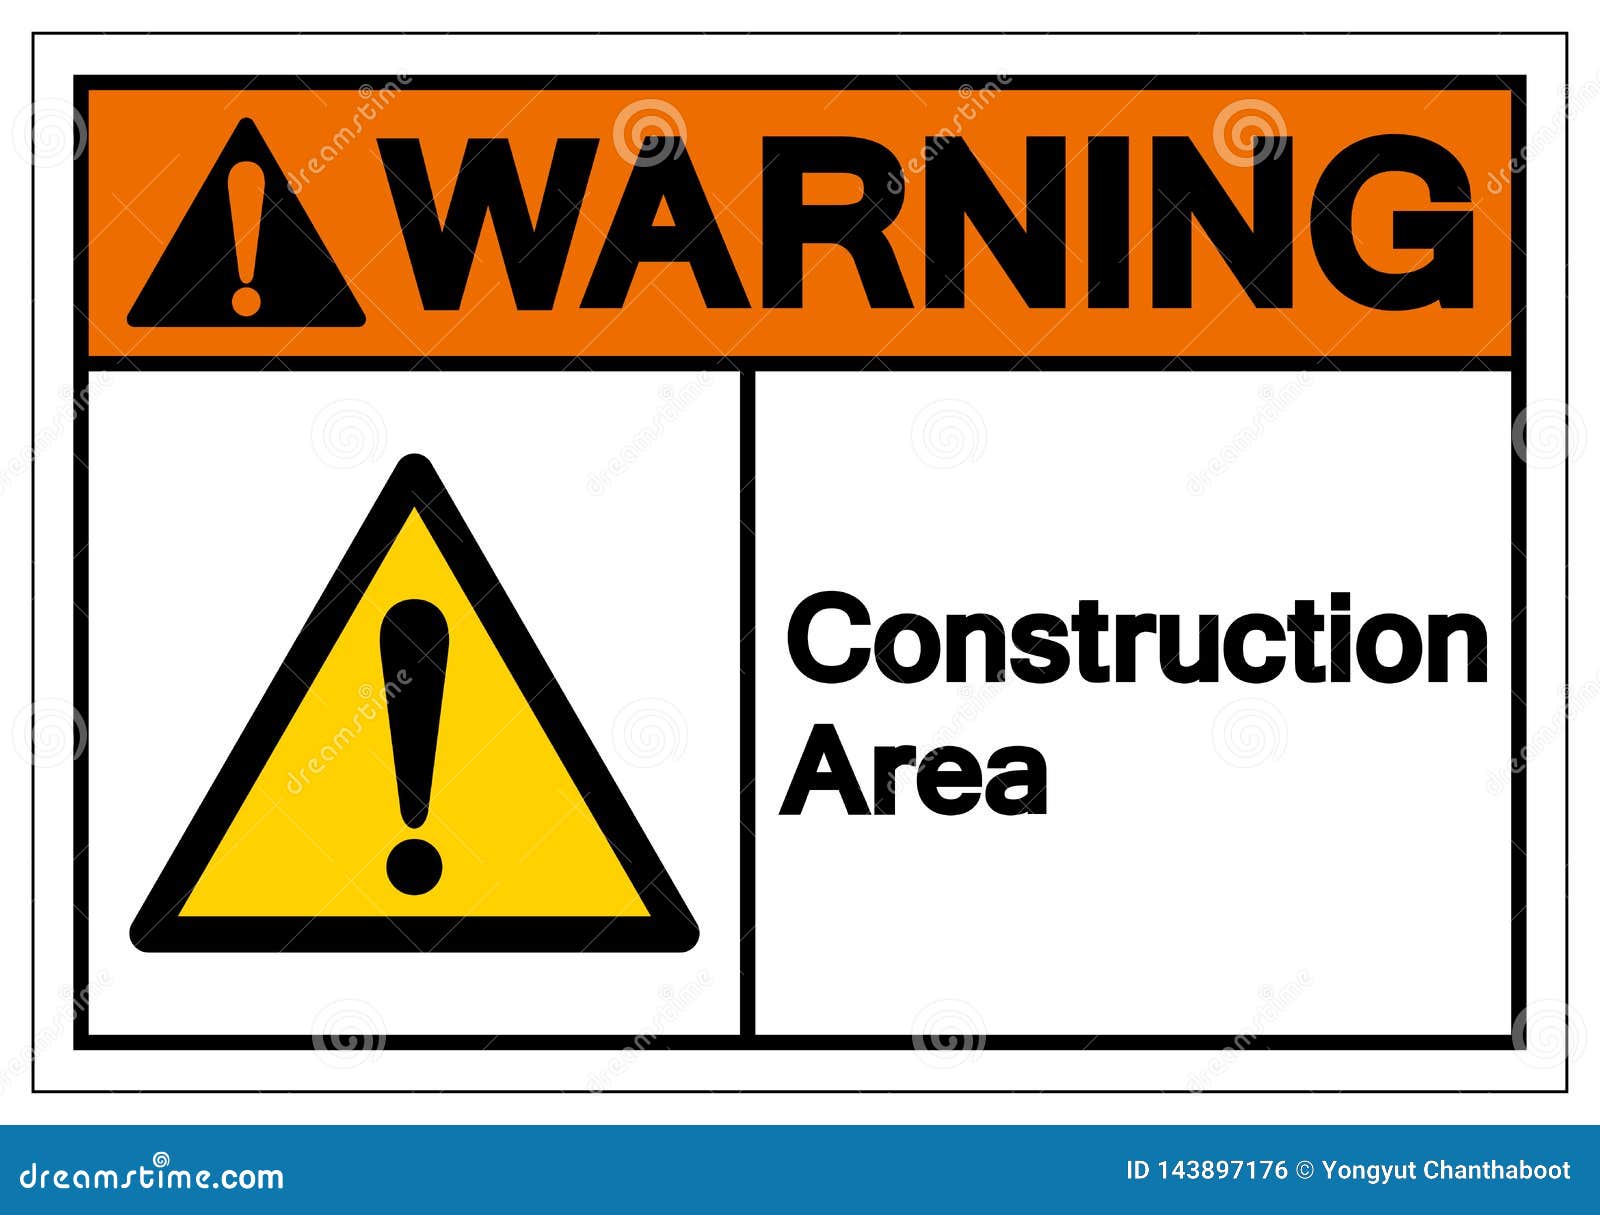 Warning Construction Area Symbol Sign, Vector Illustration, Isolate on ...